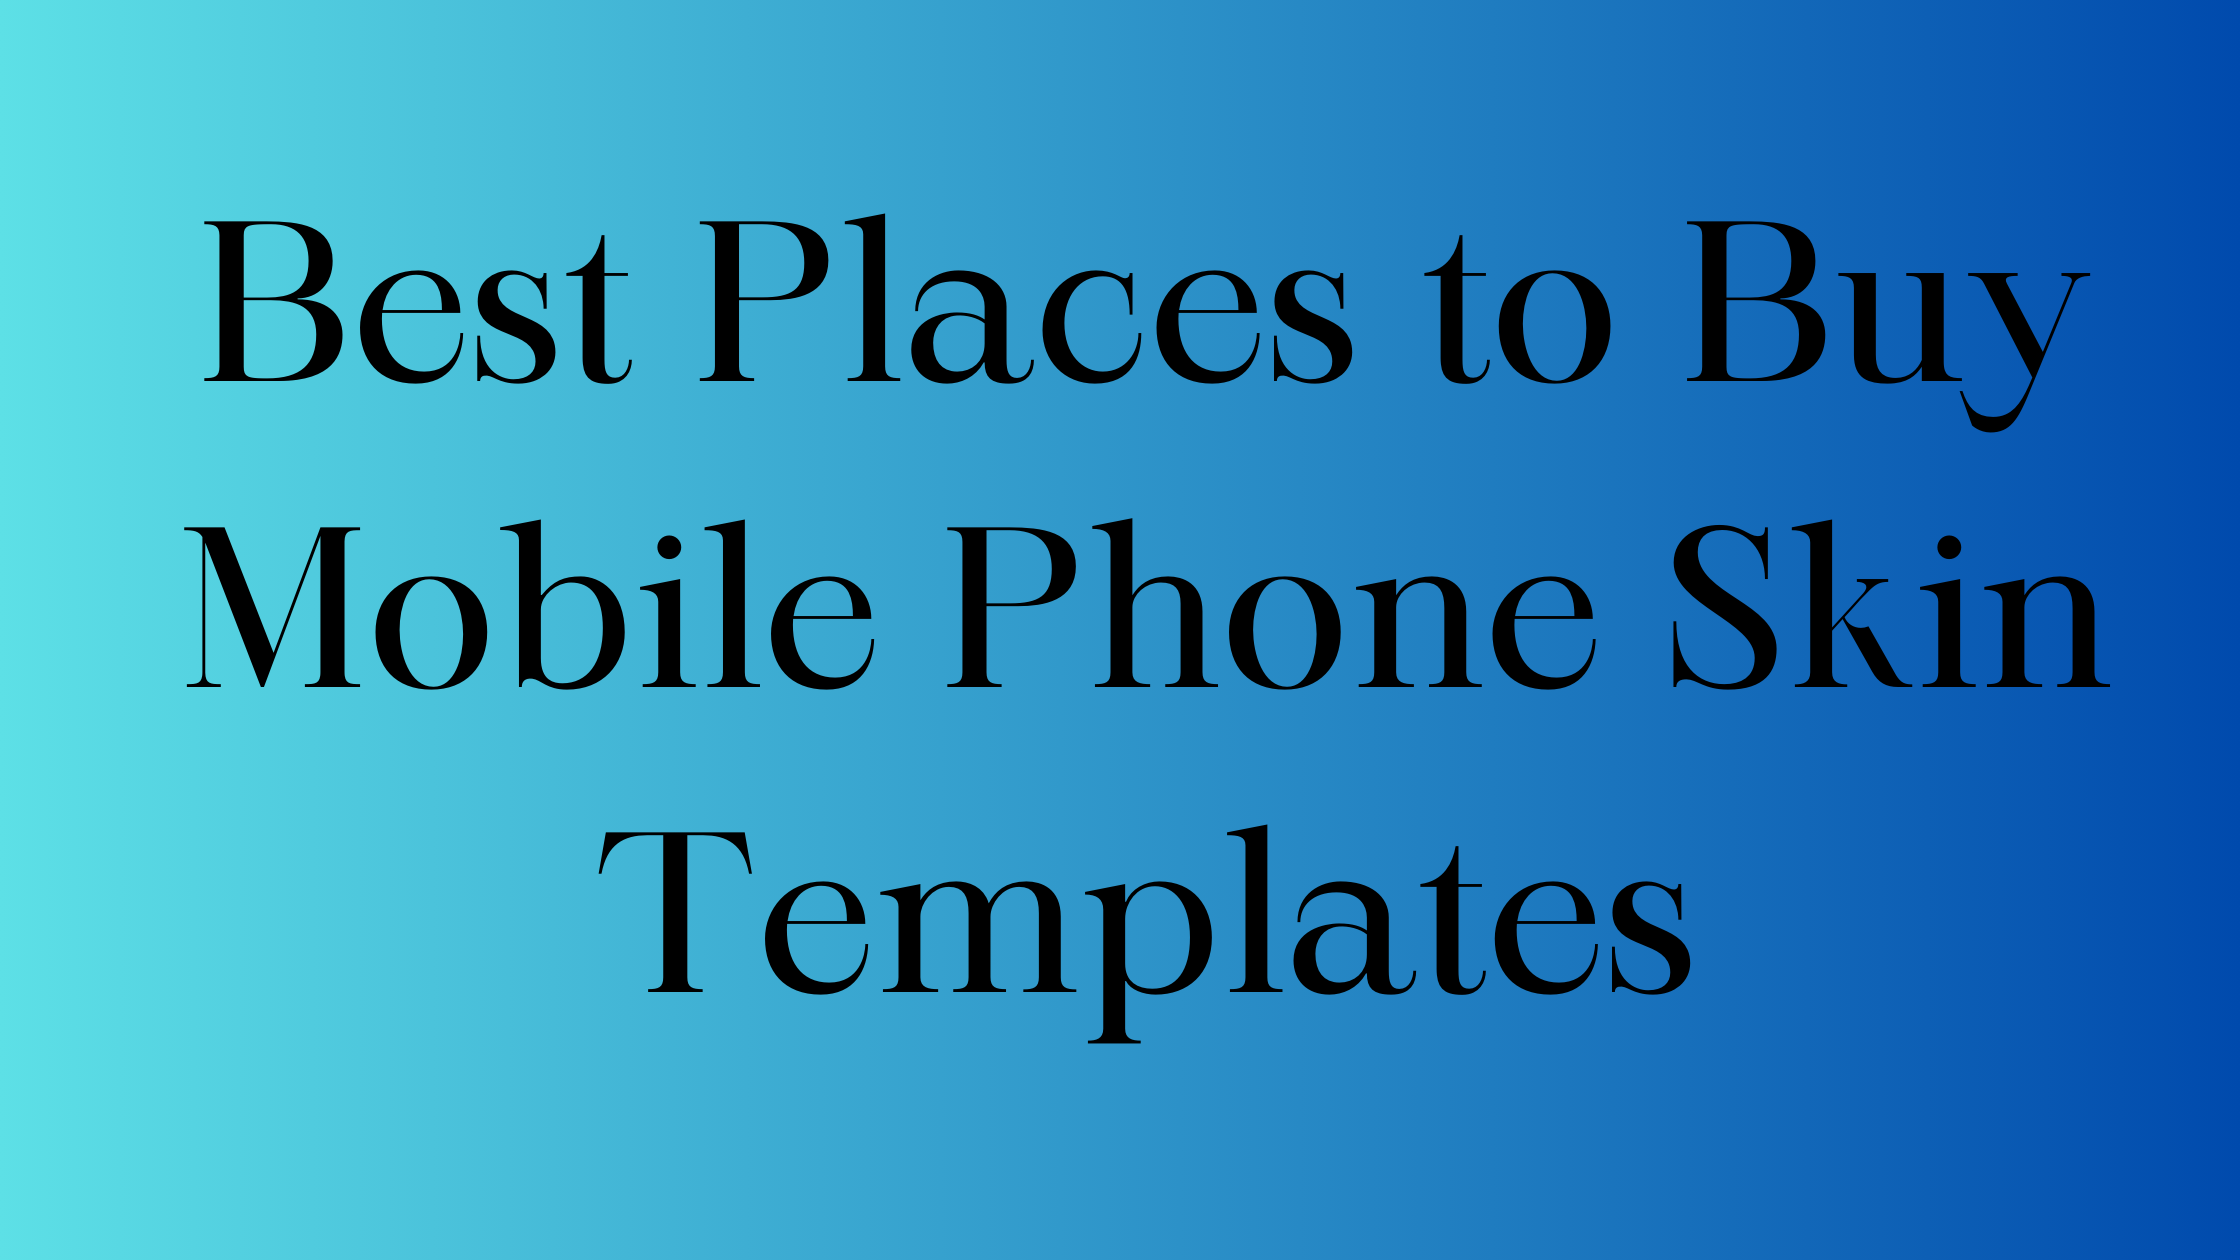 Best Places to Buy Mobile Phone Skin Templates